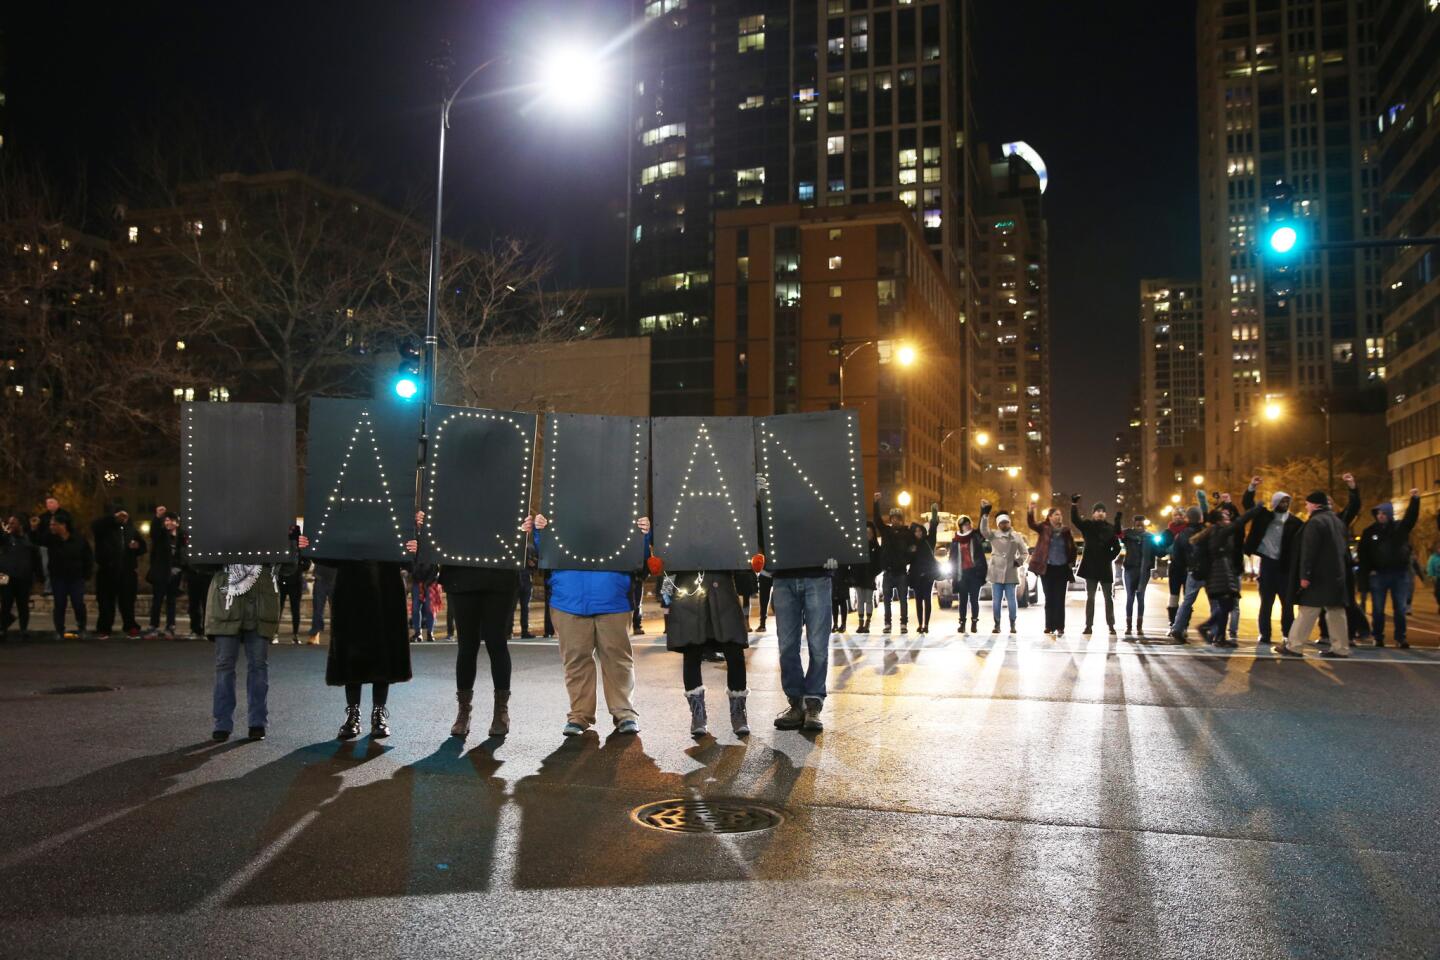 Protesters march on Nov. 24, 2015, after the city released a dash-cam video showing teenager Laquan McDonald being fatally shot by Chicago police Officer Jason Van Dyke.